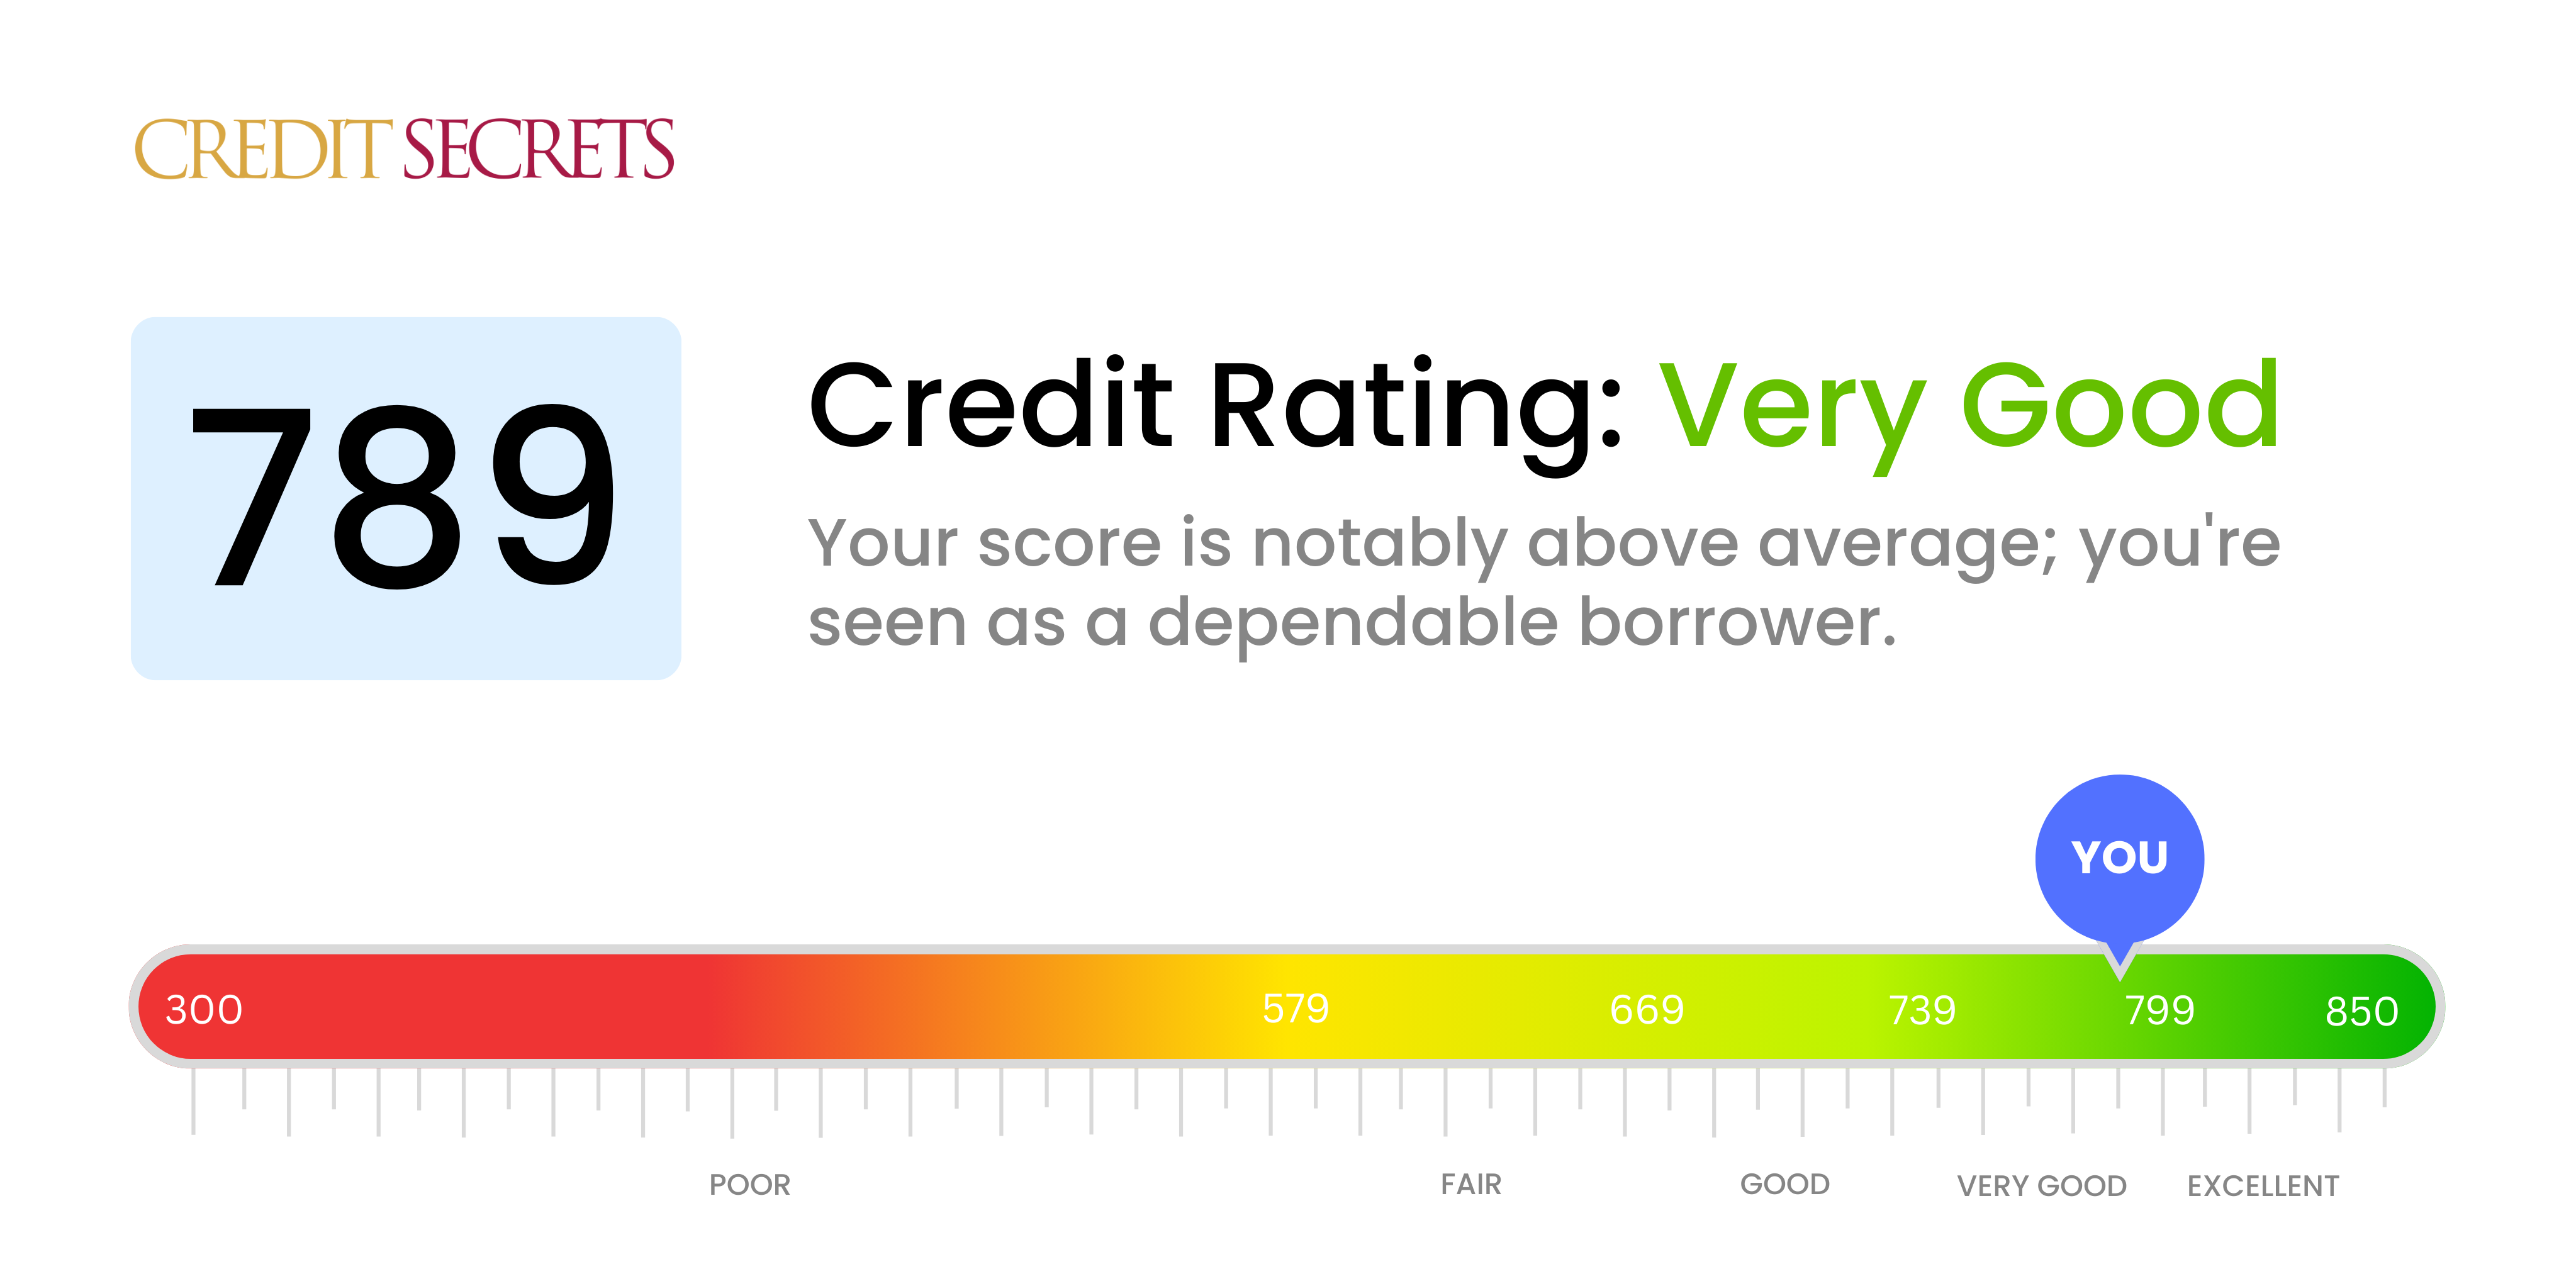 Is 789 a good credit score?